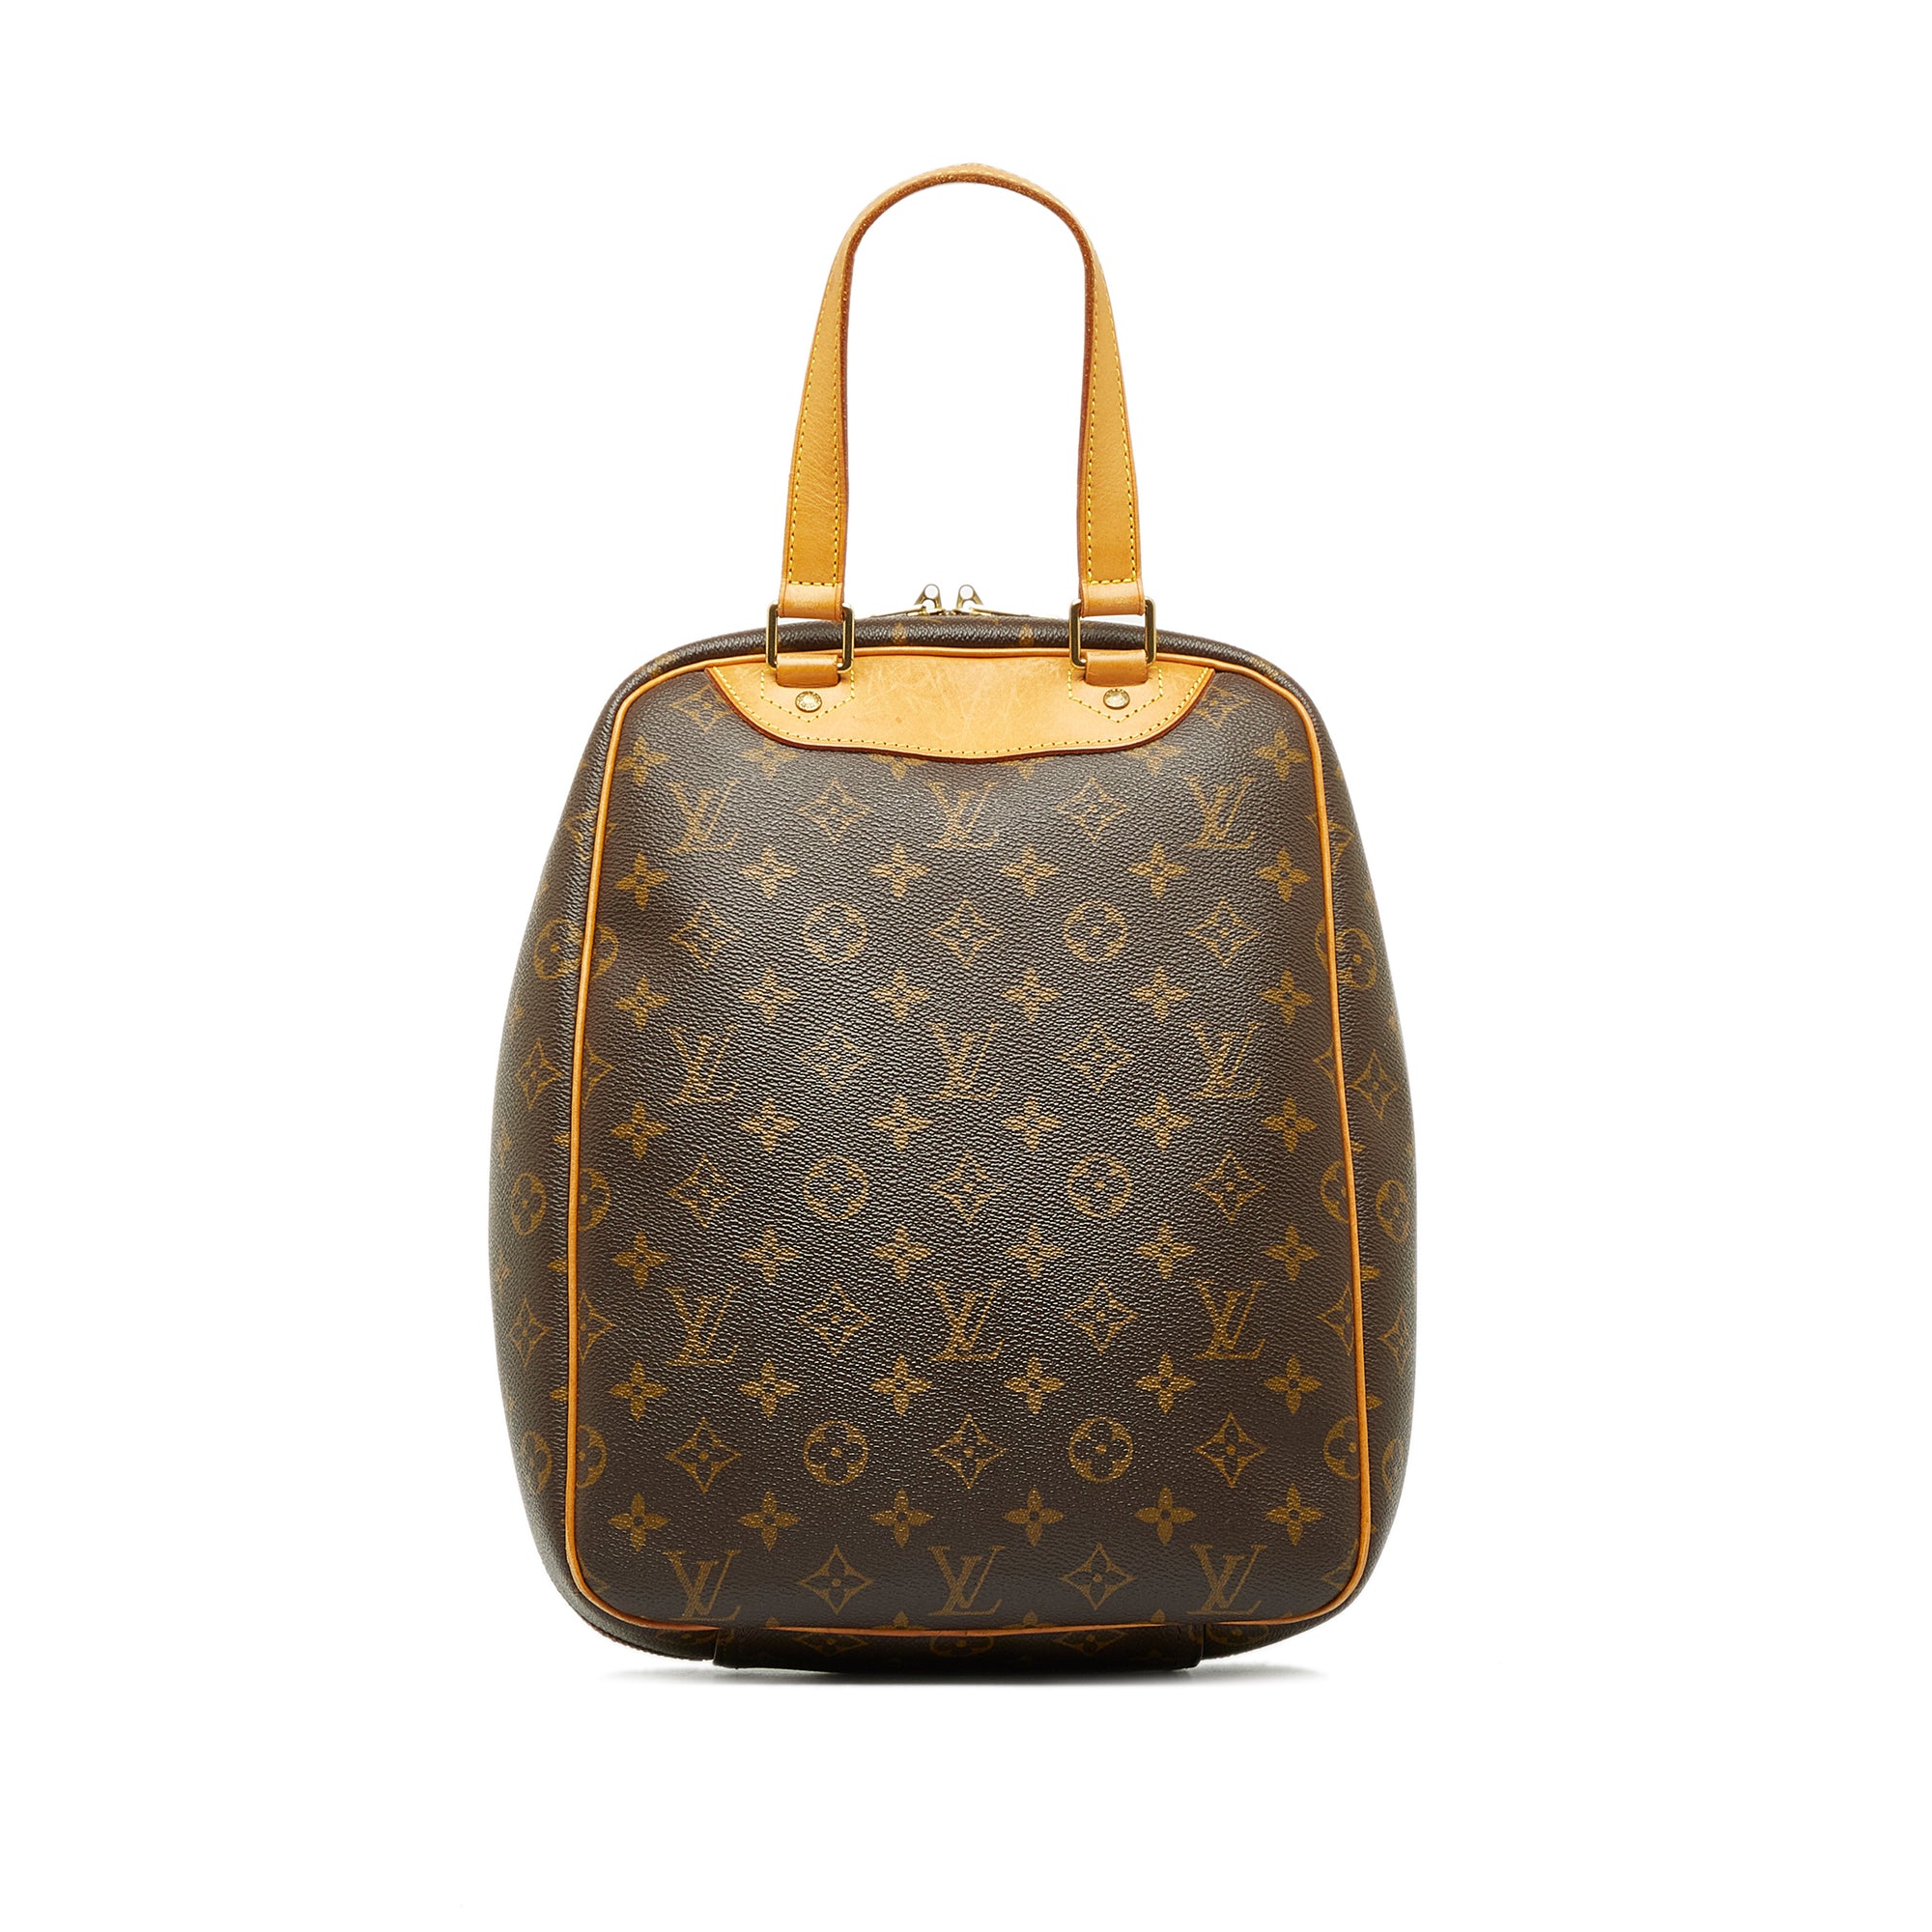 LV Luco Bag in Monogram Canvas and Tan Leather Trim - Handbags